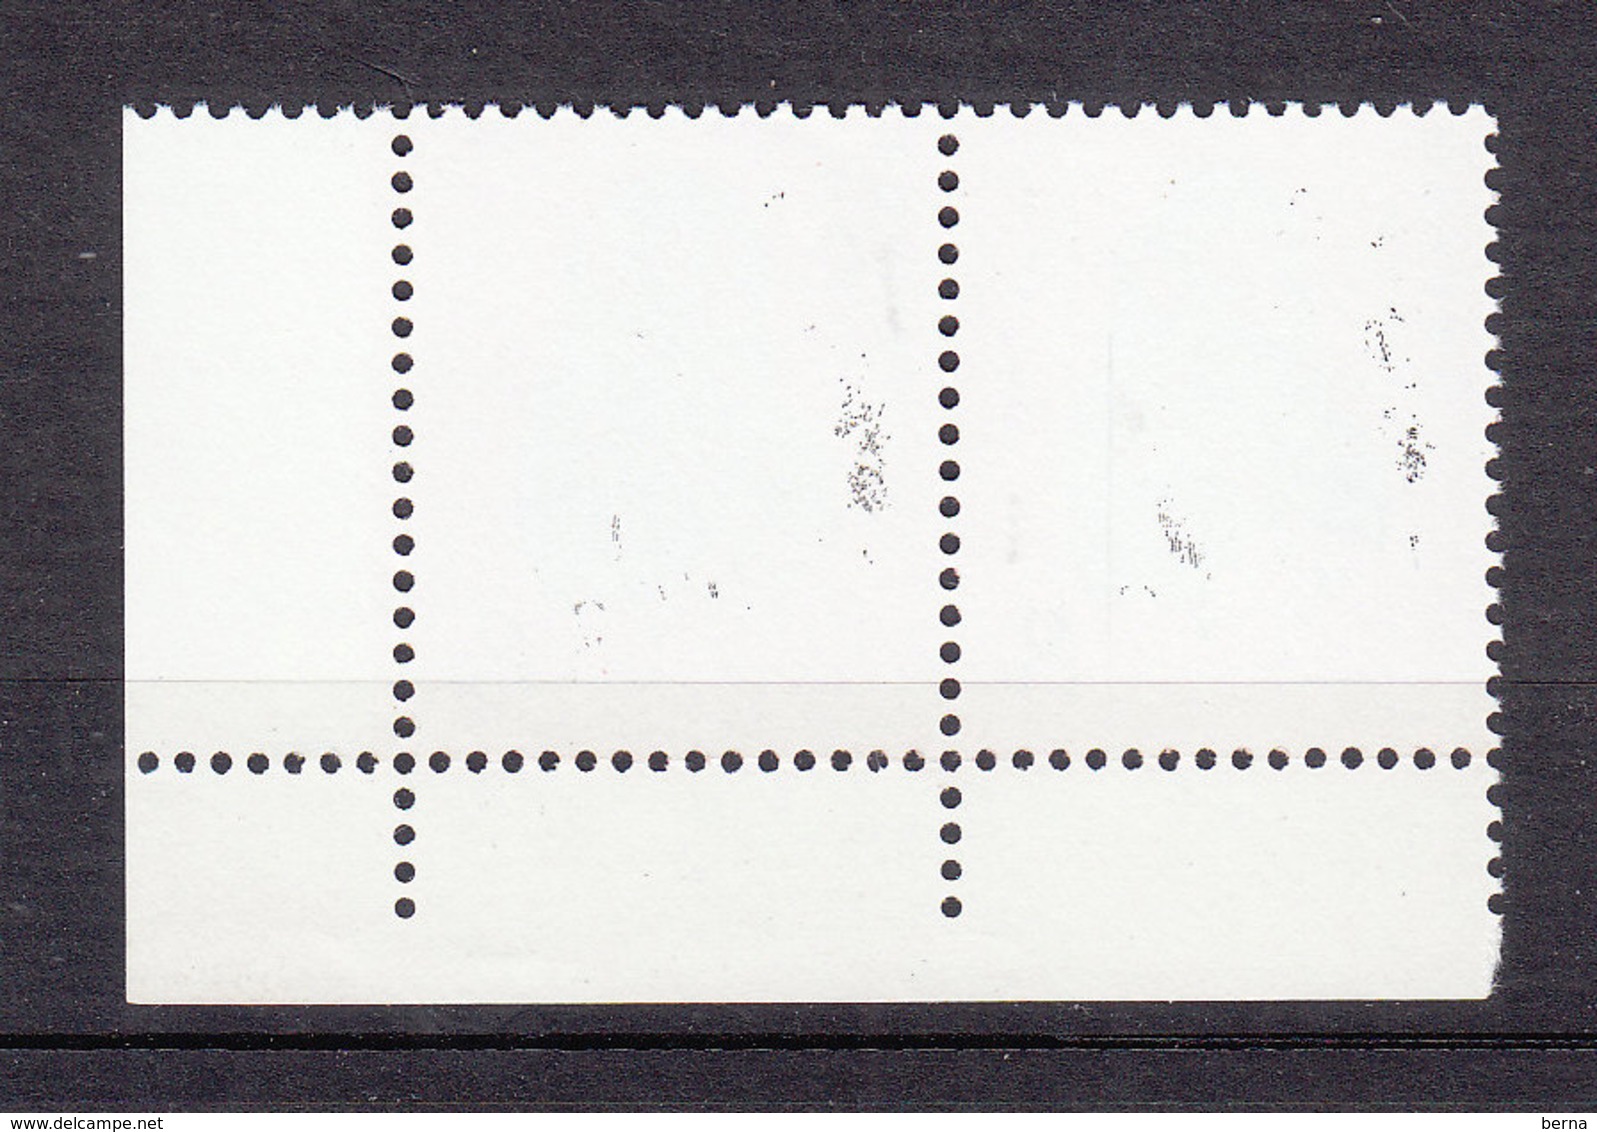 CHINA MONKEY SG 2968 PAIR CORNER SHEET NEW YEAR 1980 MNH -LIGHT BLACK MARKS AT REVERSE AS USUAL. READ SELLING CONDITIONS - Unused Stamps